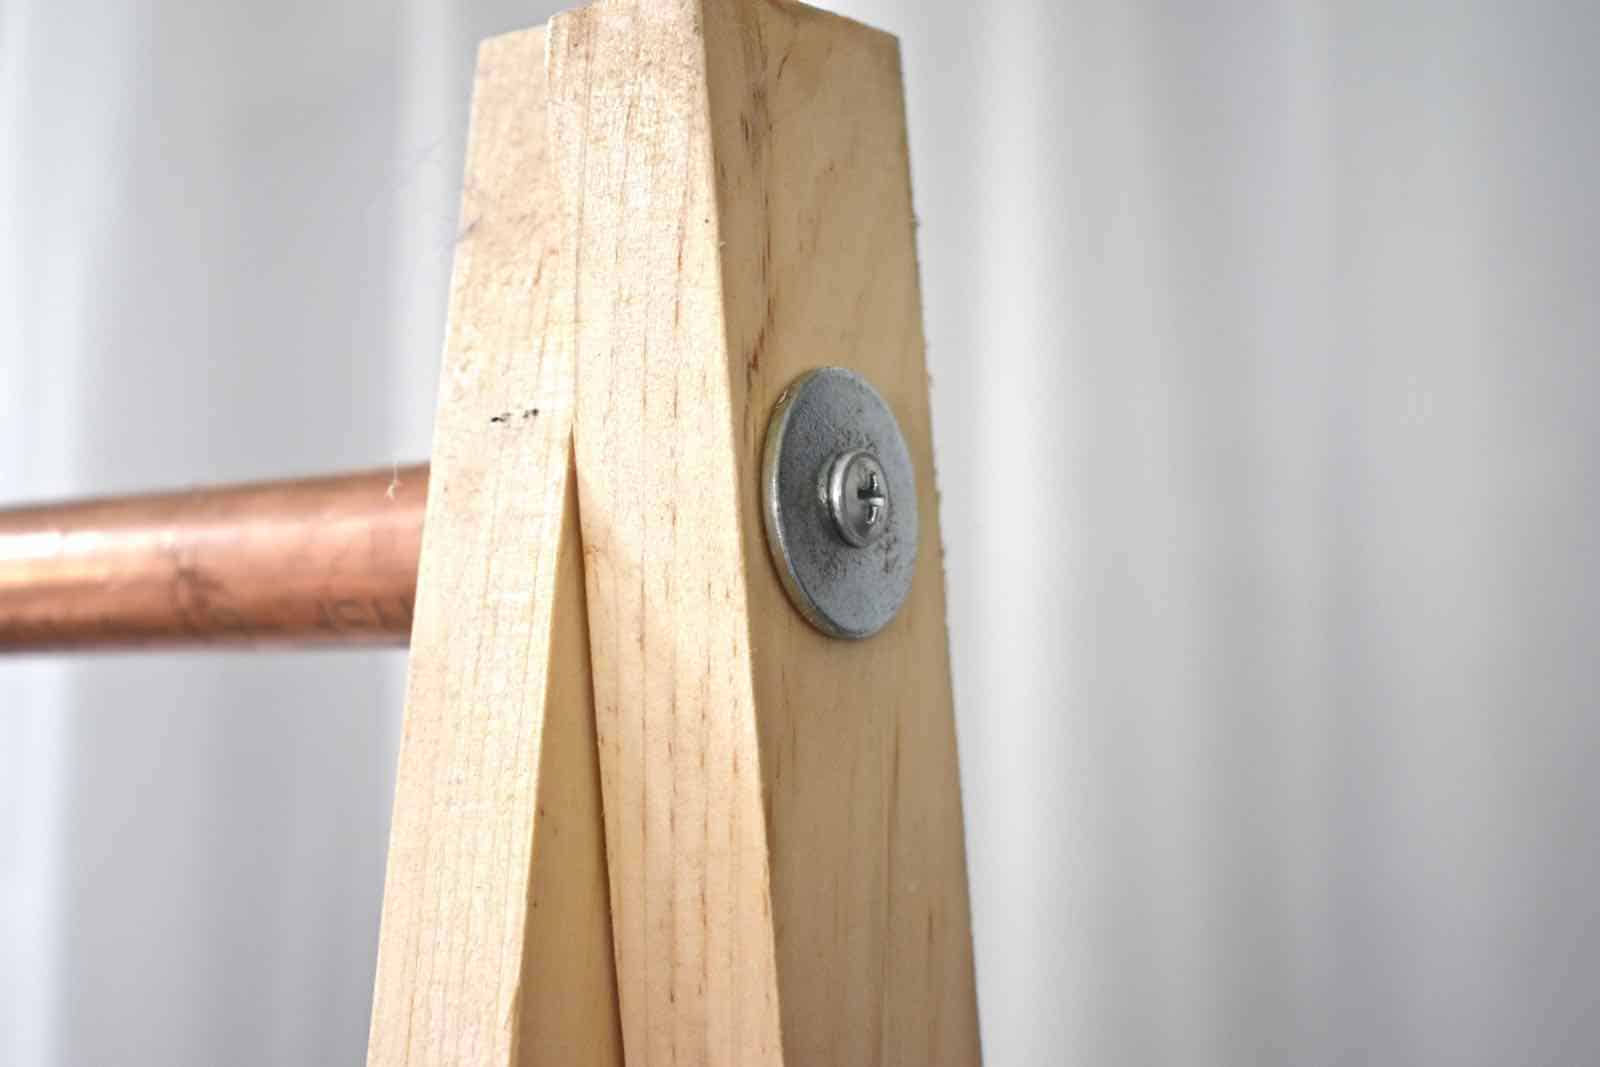 washer and screw to secure dowel